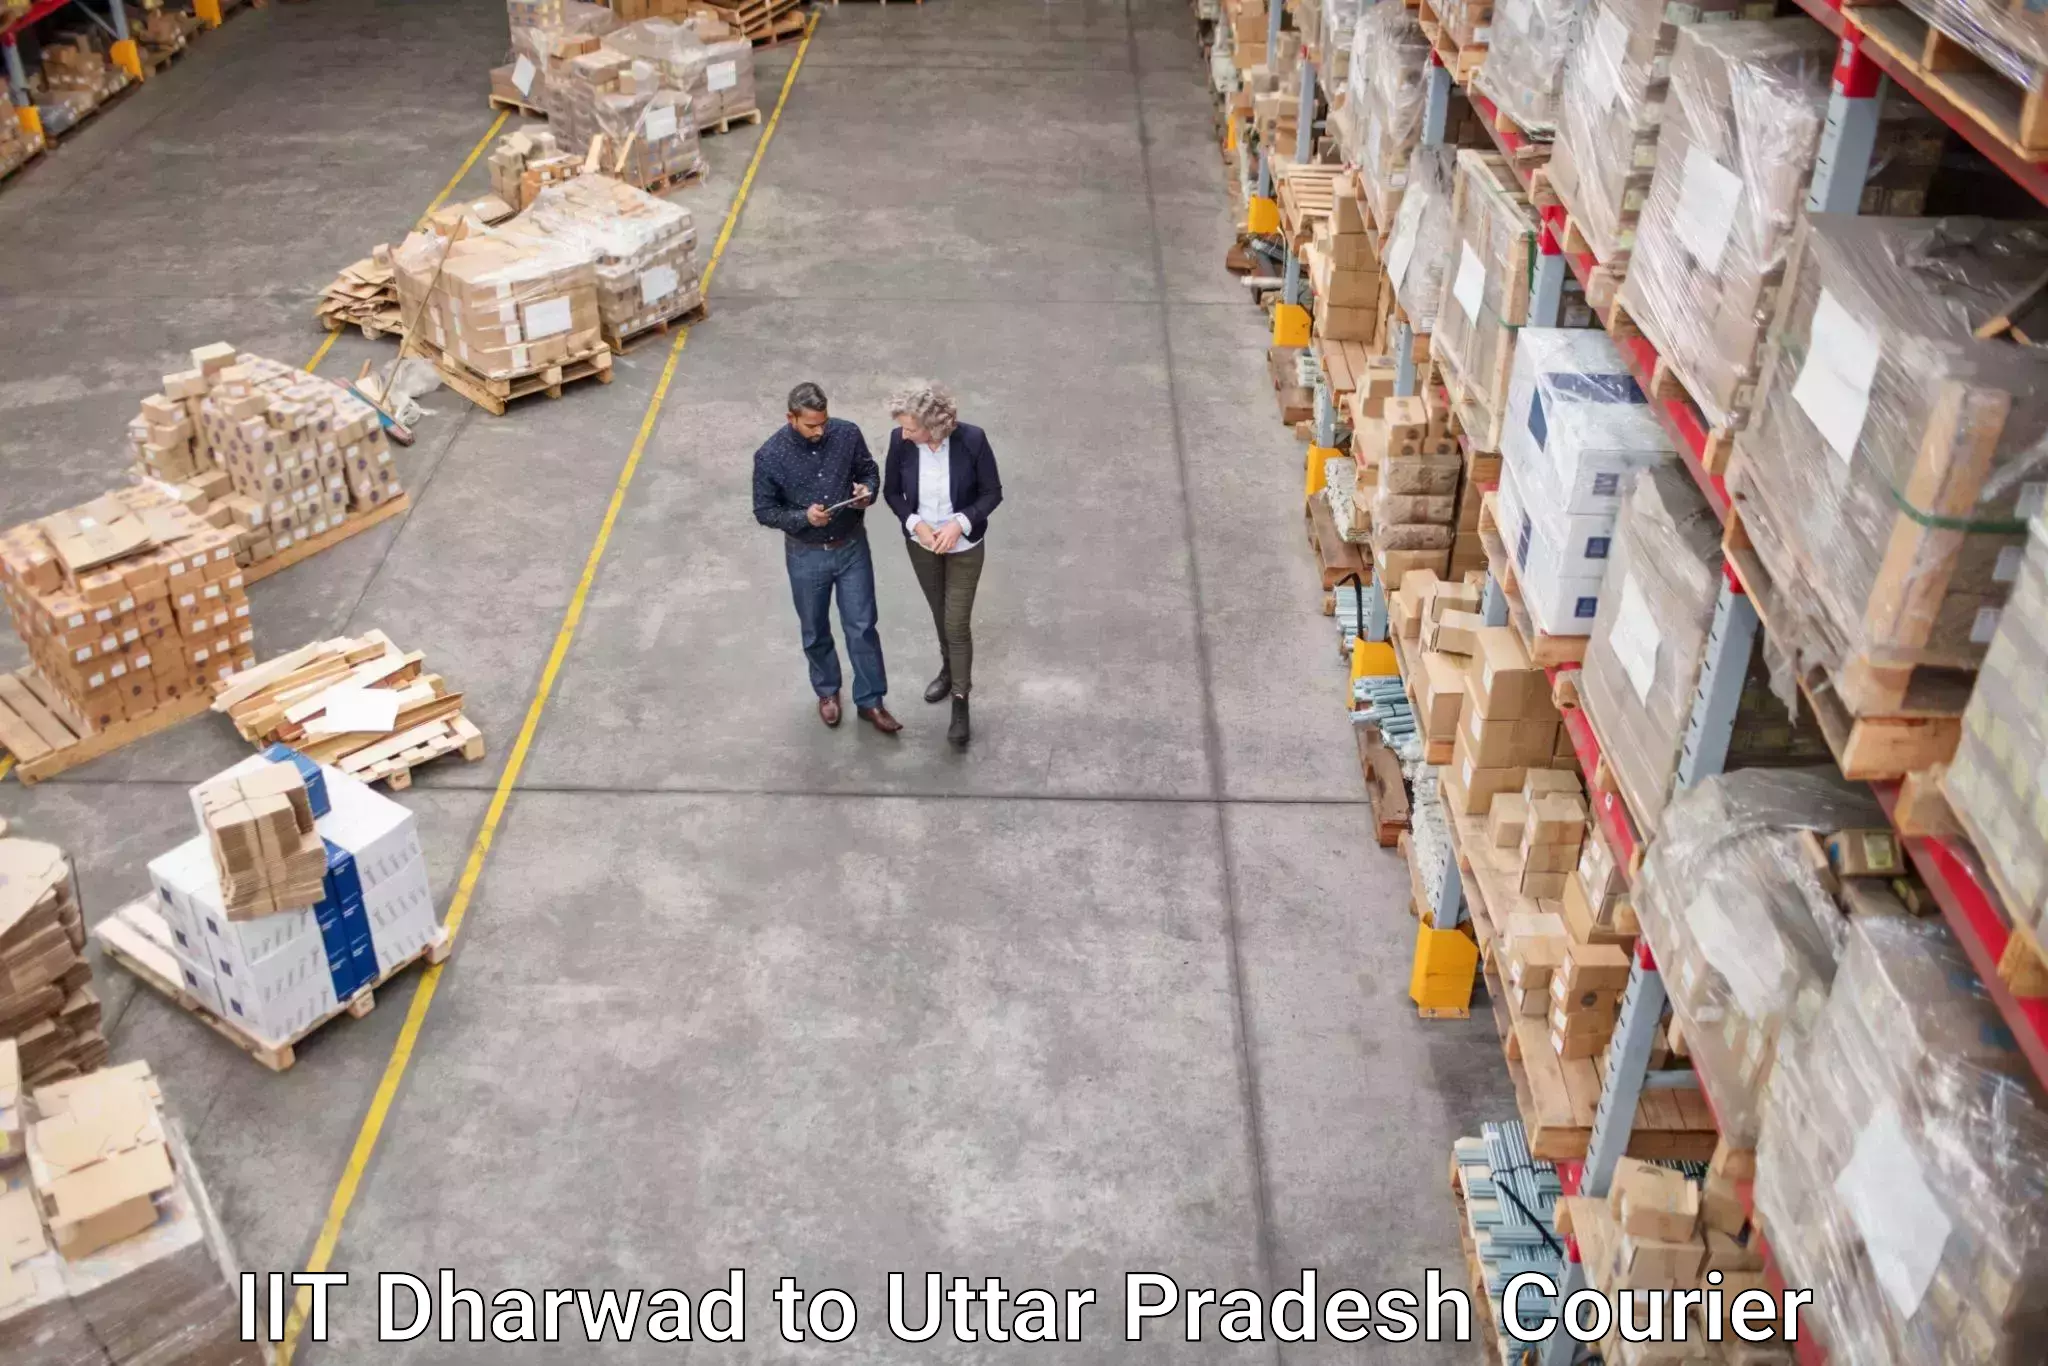 Business courier solutions IIT Dharwad to Agra